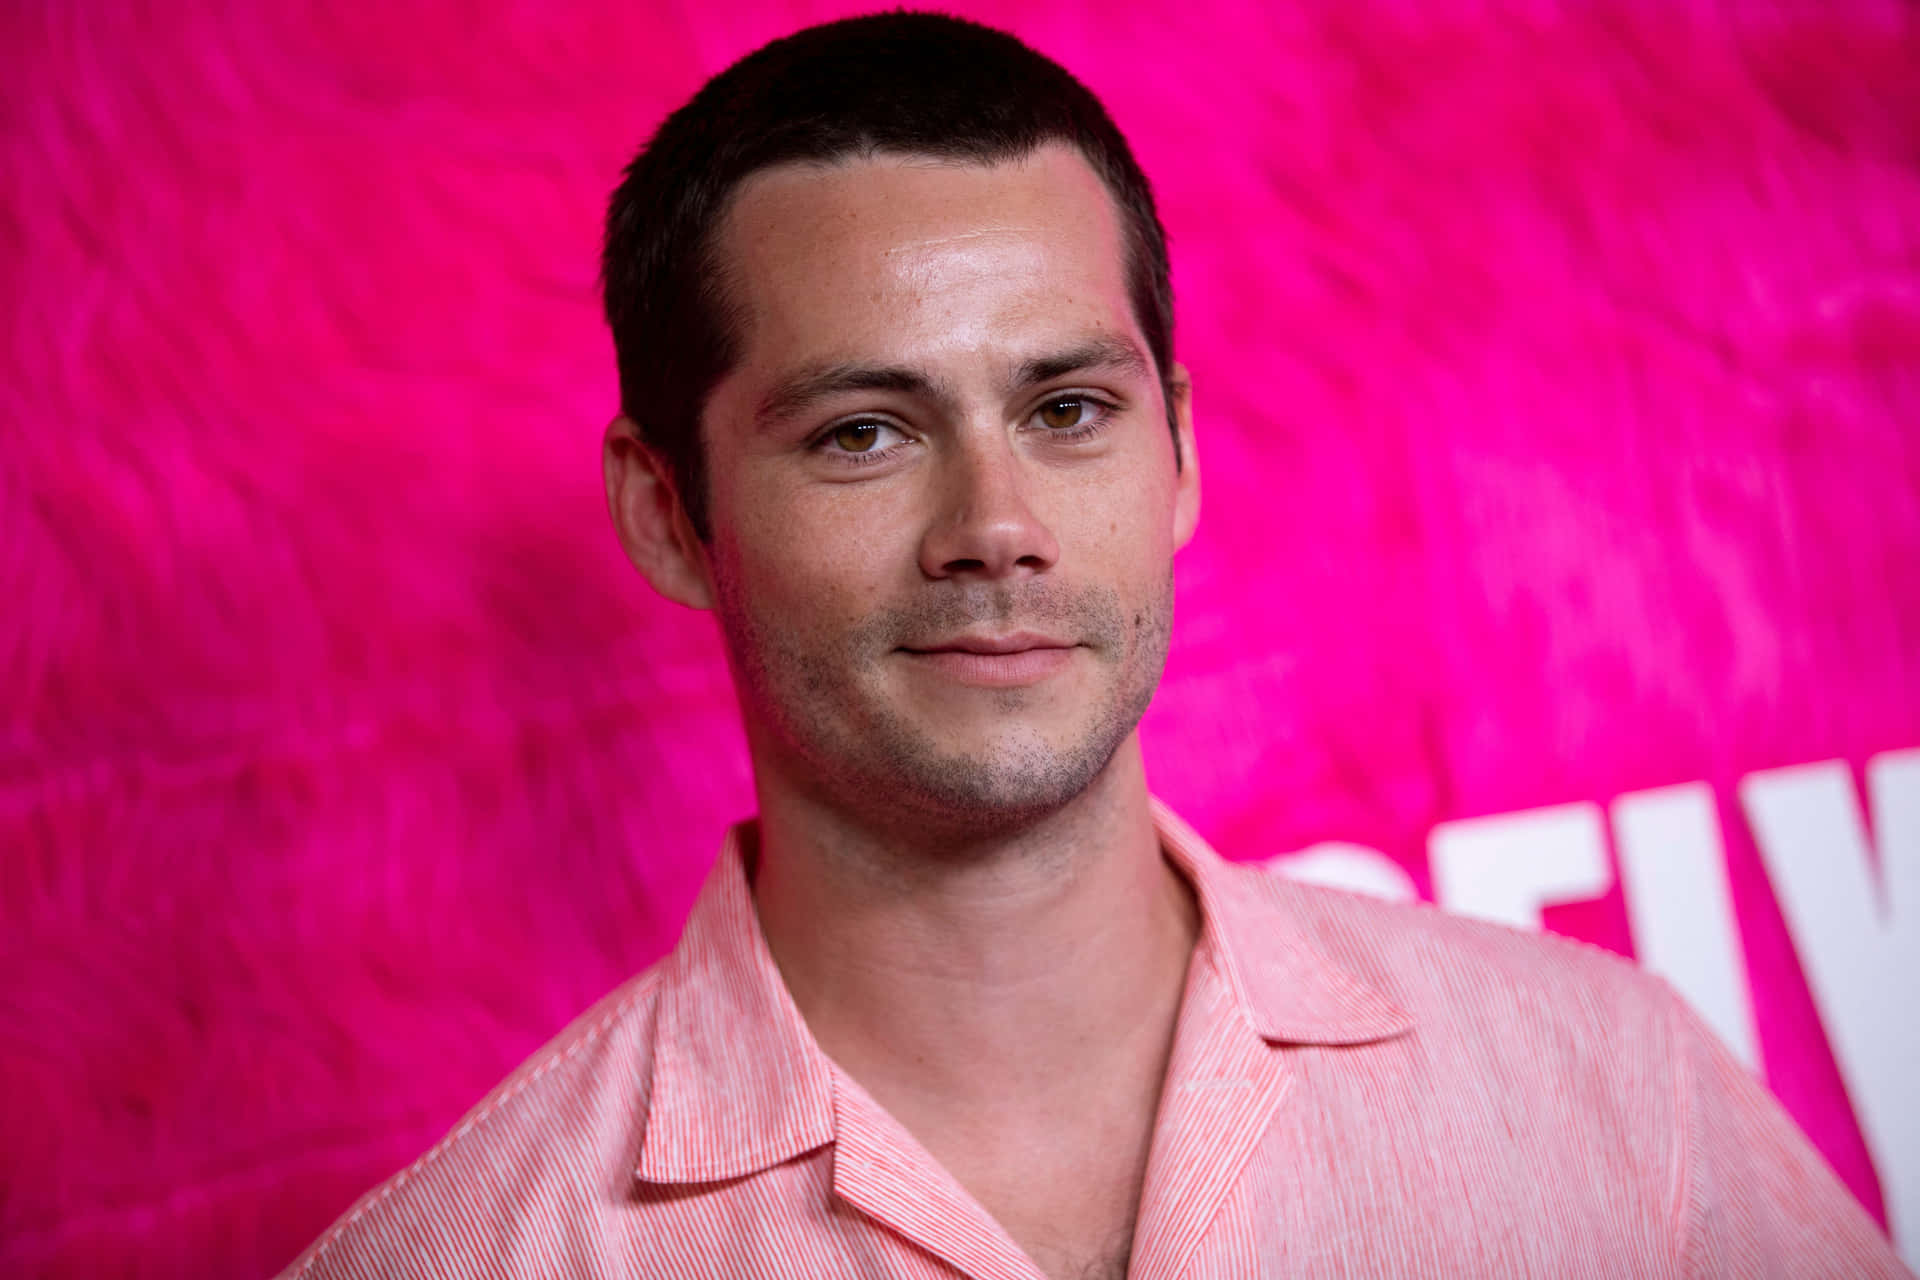 A Man In A Pink Shirt Is Posing For A Photo Wallpaper